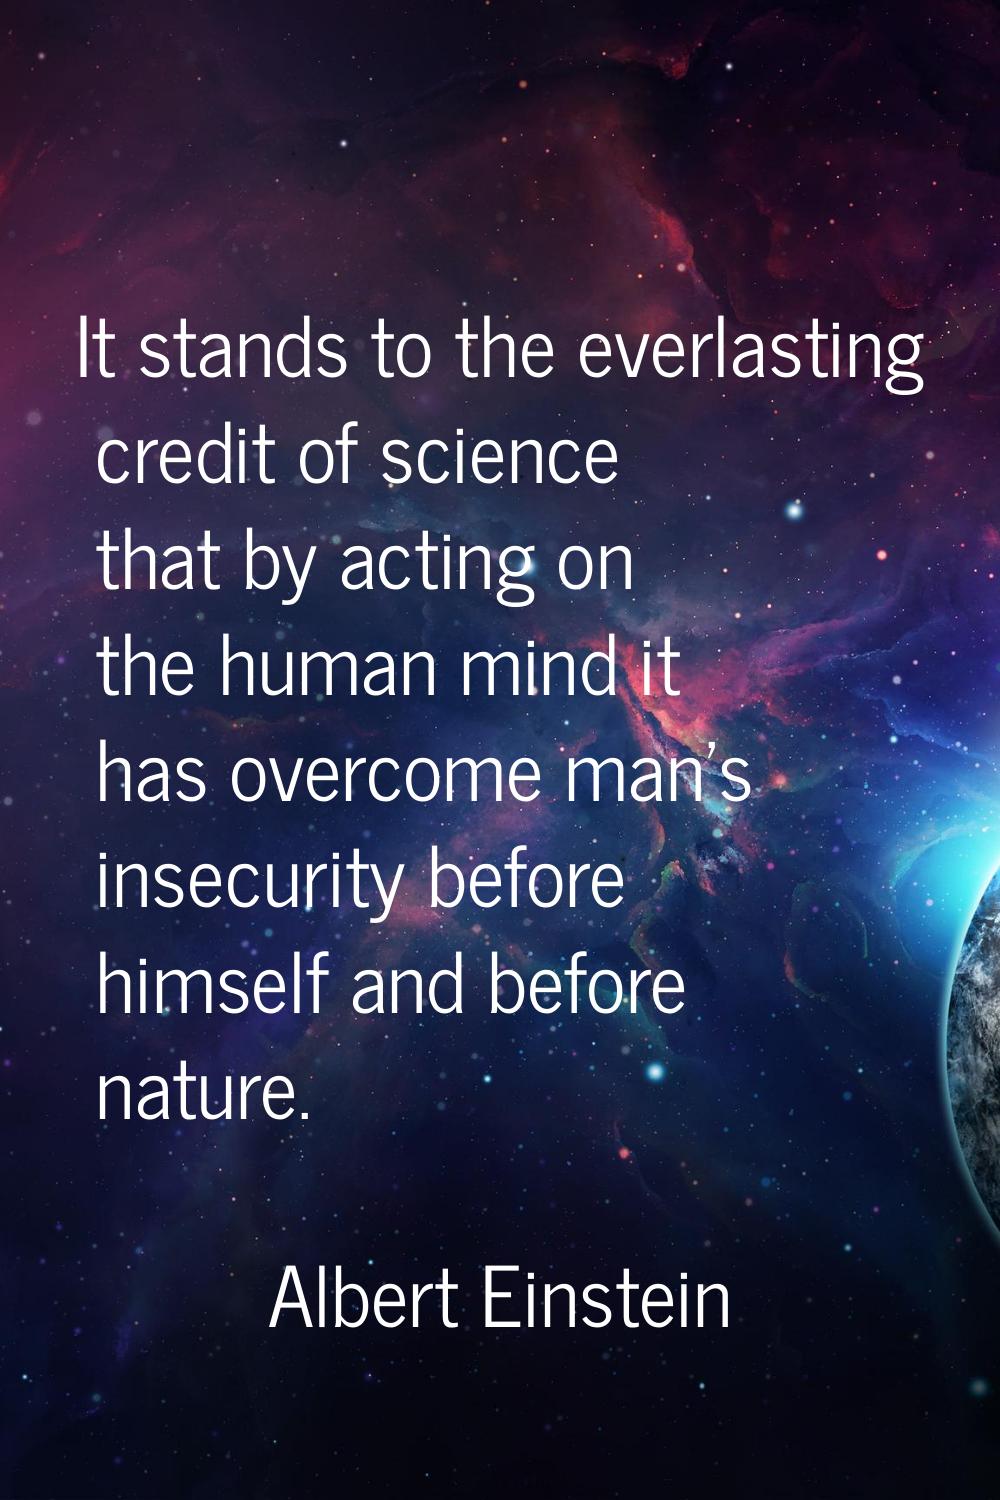 It stands to the everlasting credit of science that by acting on the human mind it has overcome man